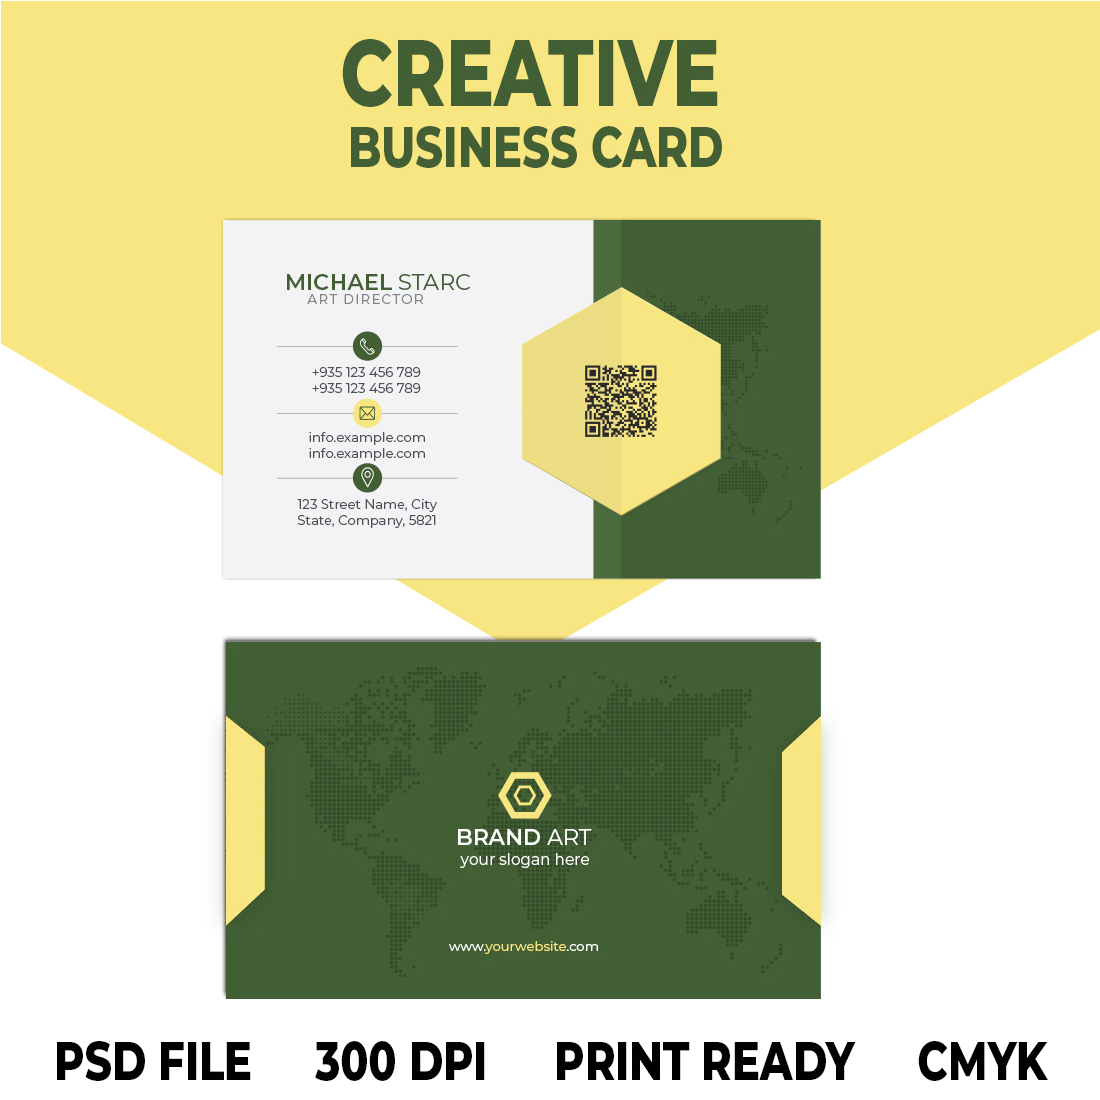 Preview business card file features.